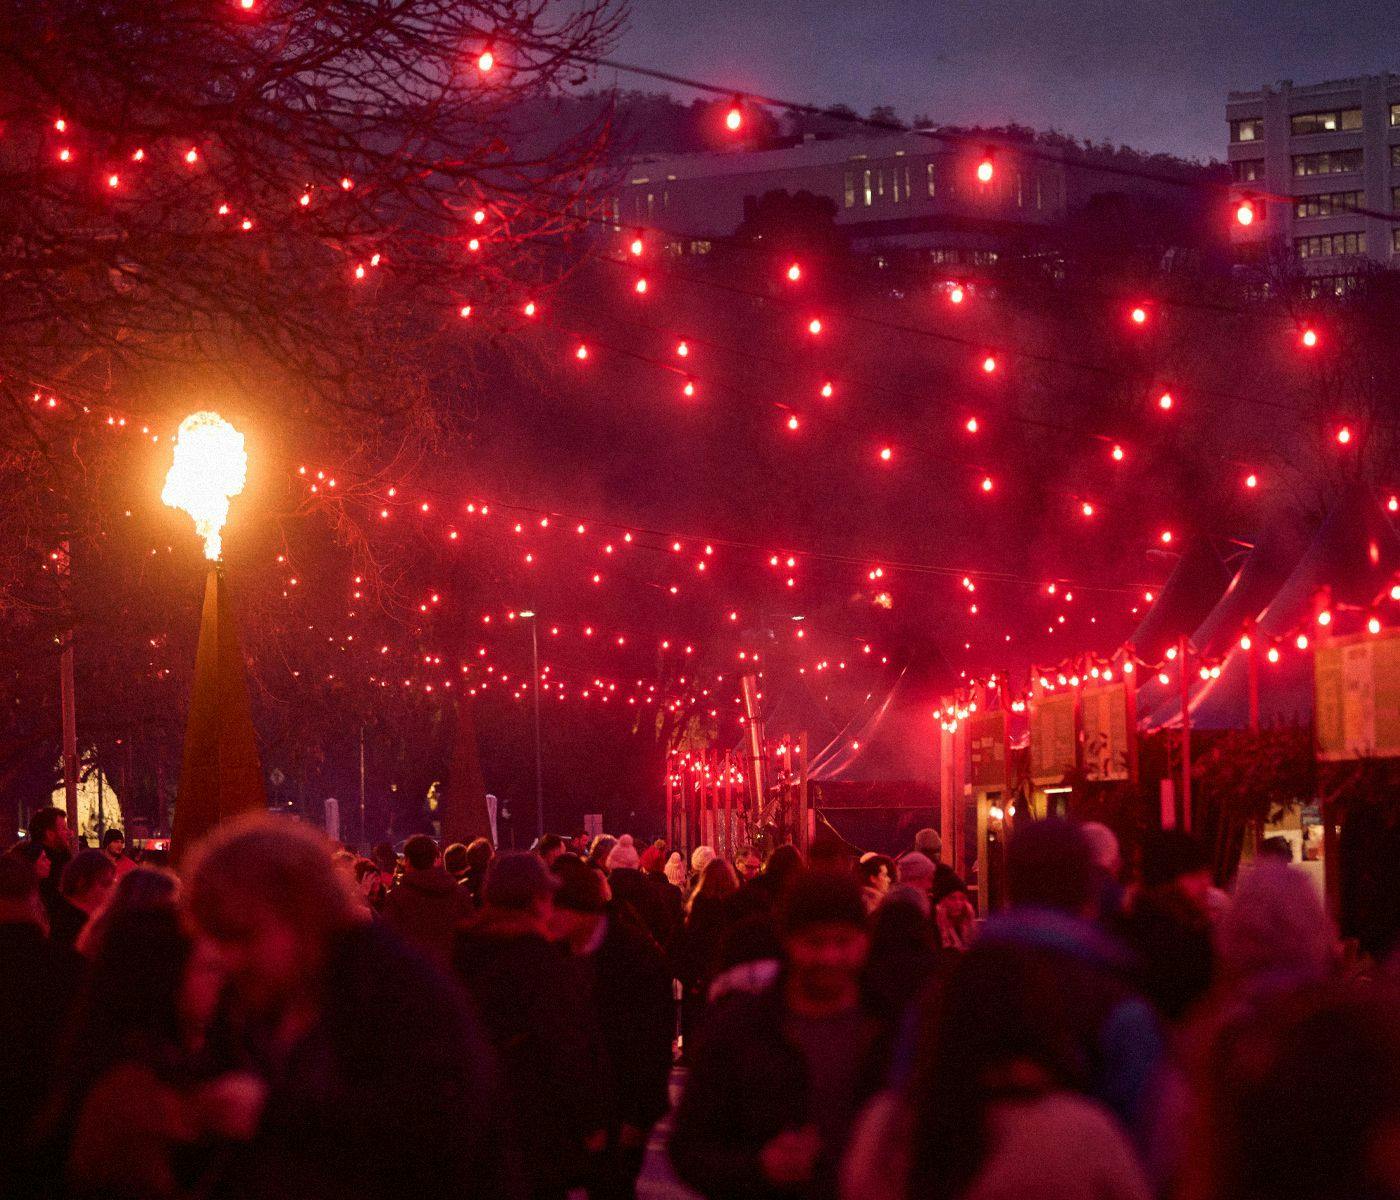 A large crowd of people outside under red string lights at Winter Feast.